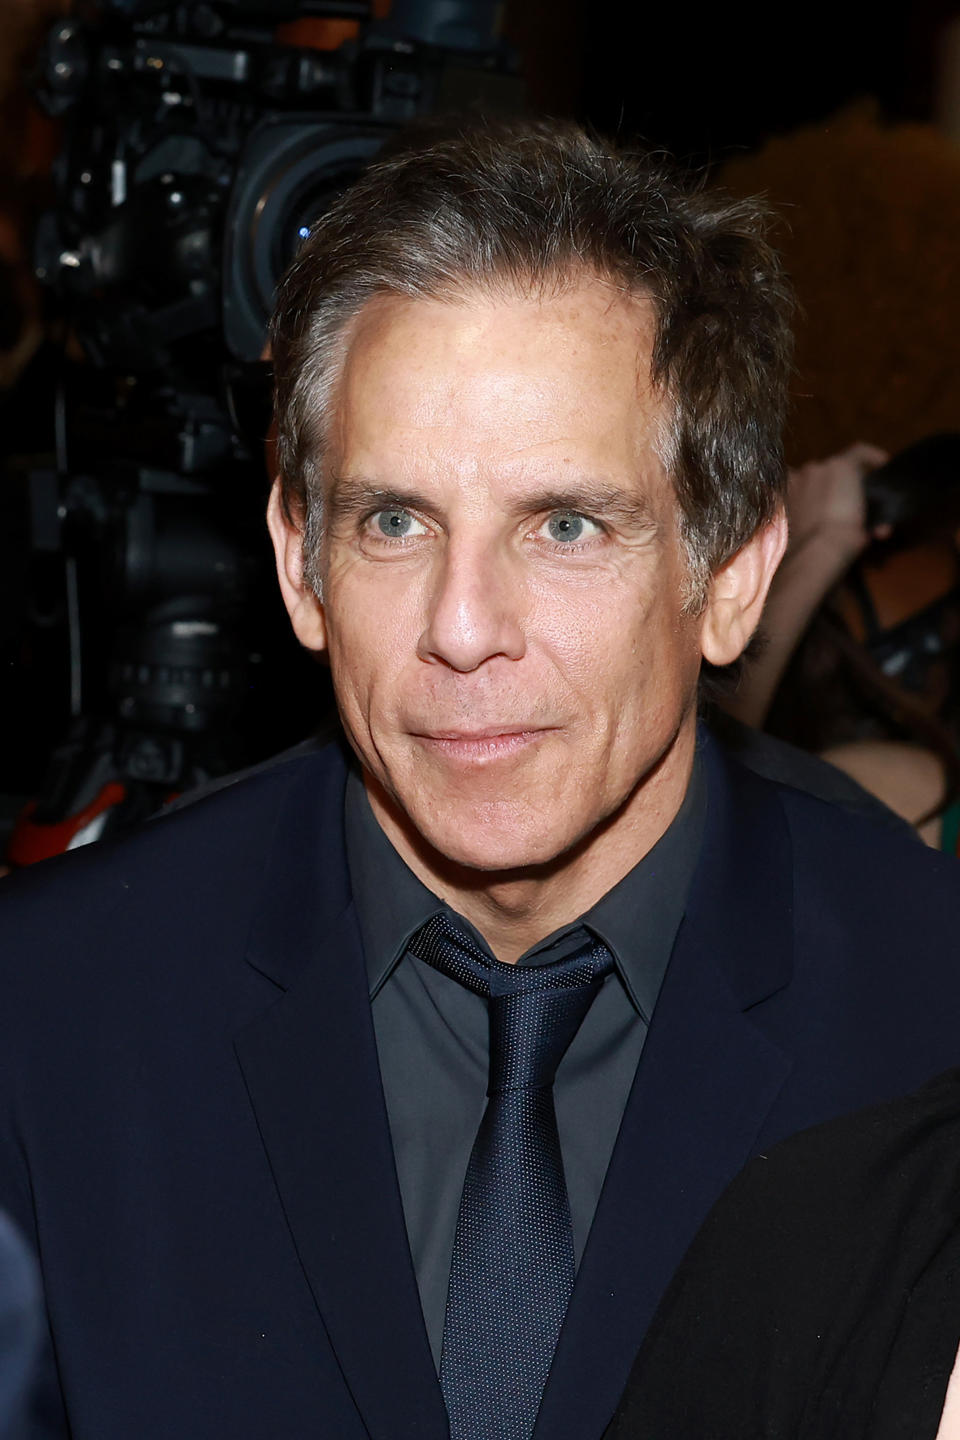 Ben Stiller, wearing a dark suit and tie, attends an event with cameras in the background